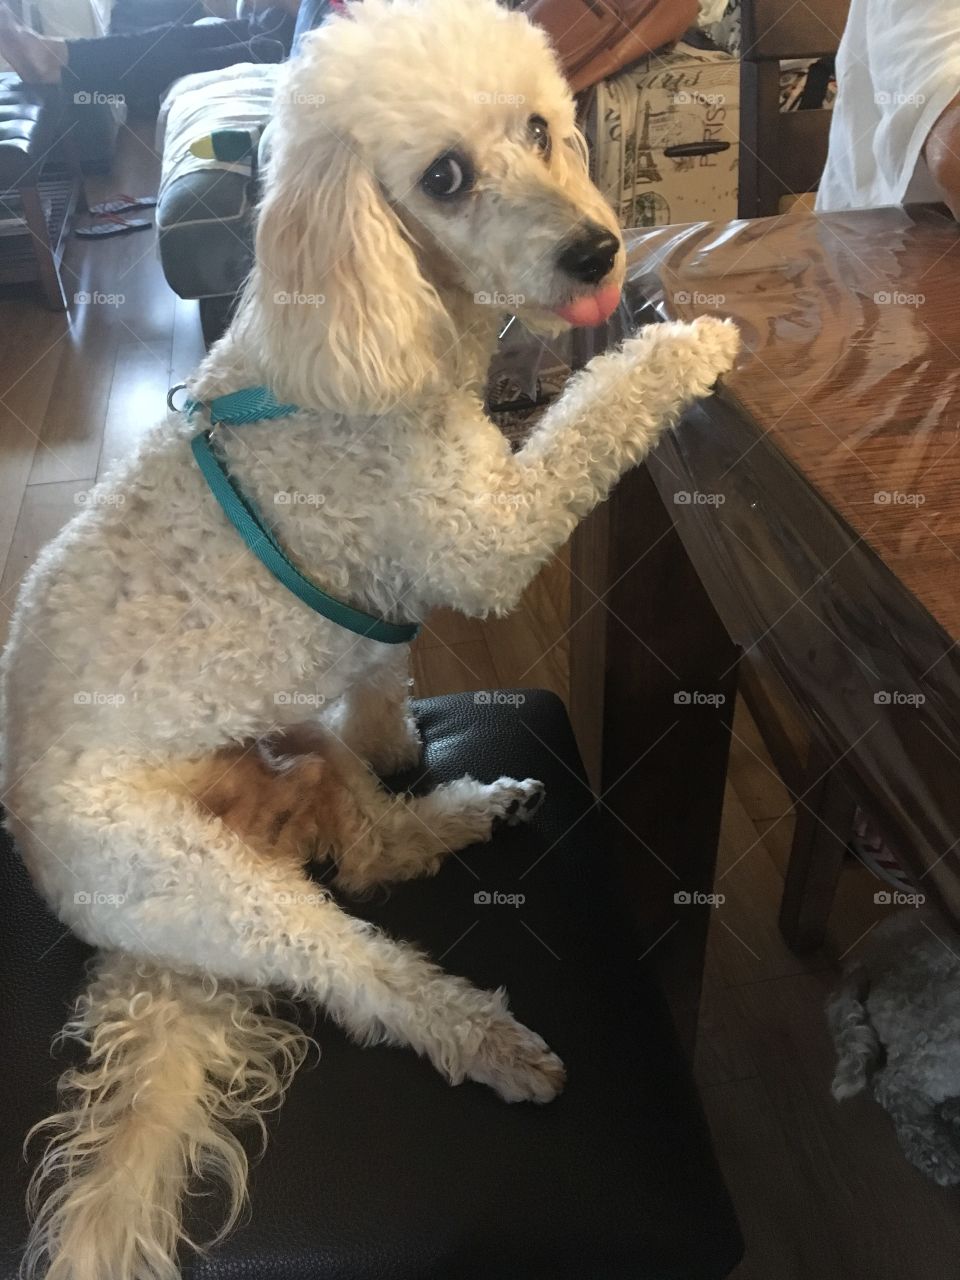 My cute poodle boy Goldie, captured him in a rare moment! It looks like he’s sticking his tongue out! He always puts his paw on the table whenever he wants something! We used to ask him now it’s his go to!